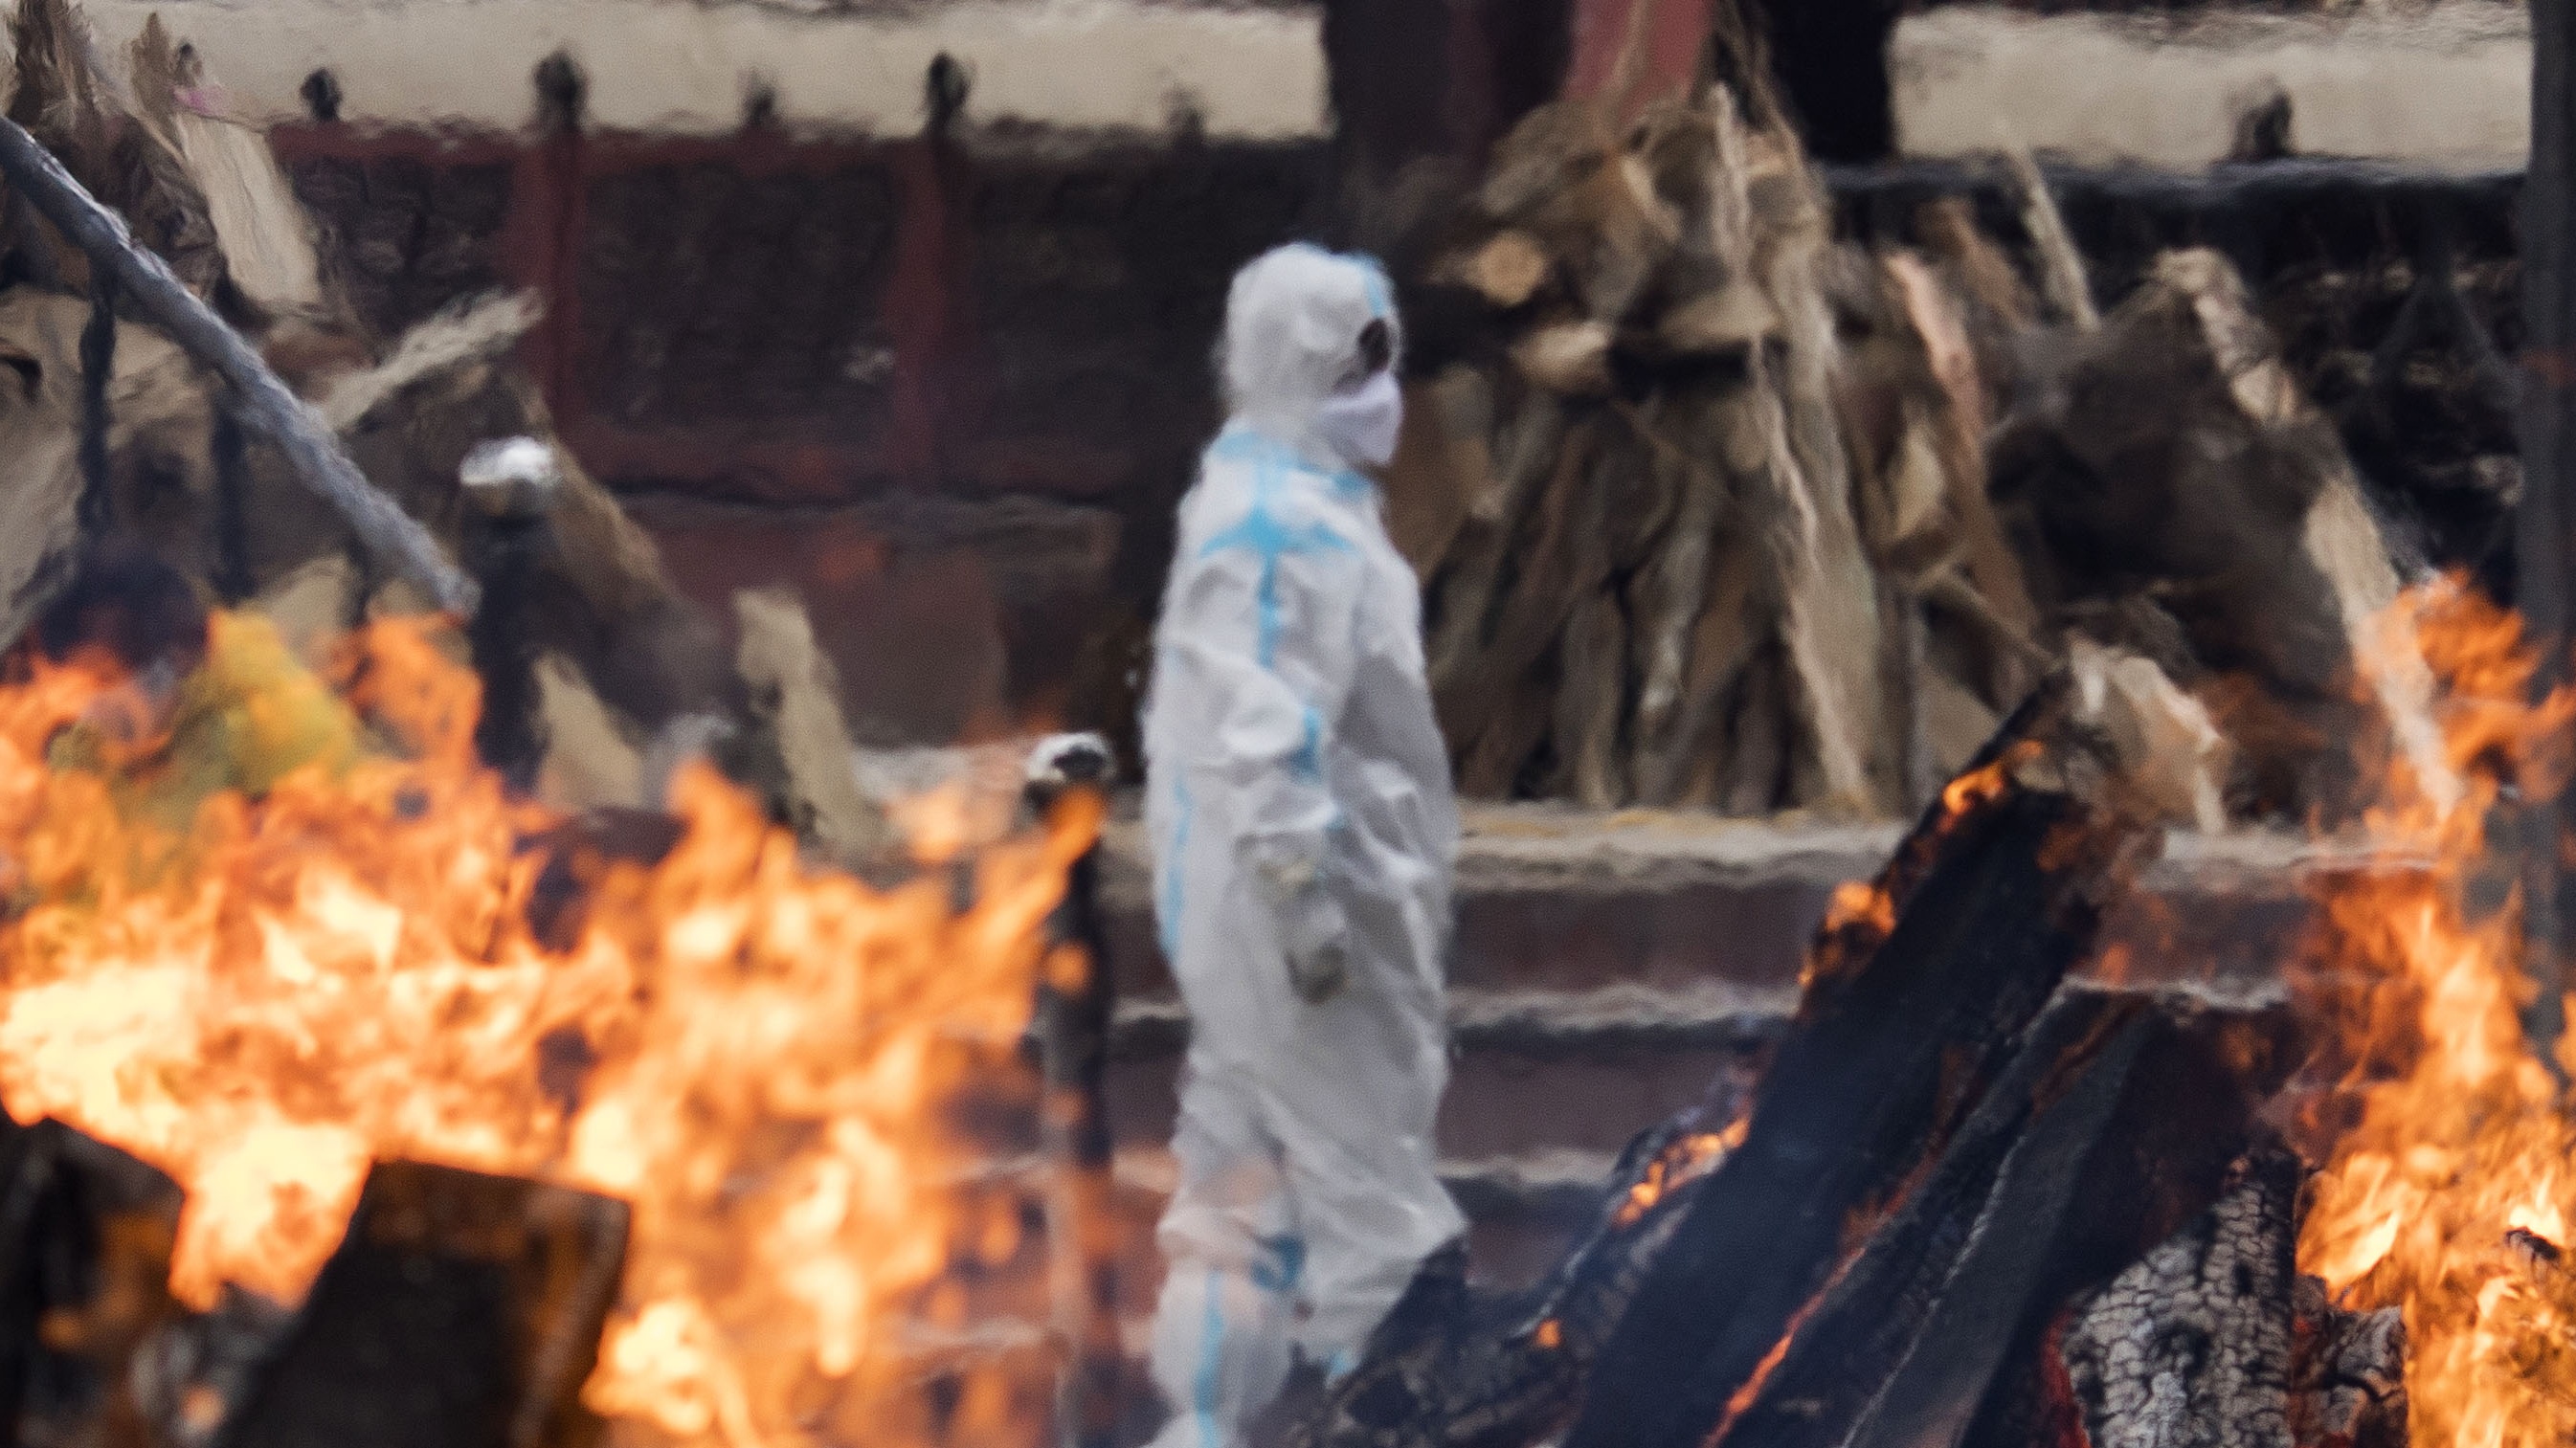 A man in PPE looks on as funeral pyres burn